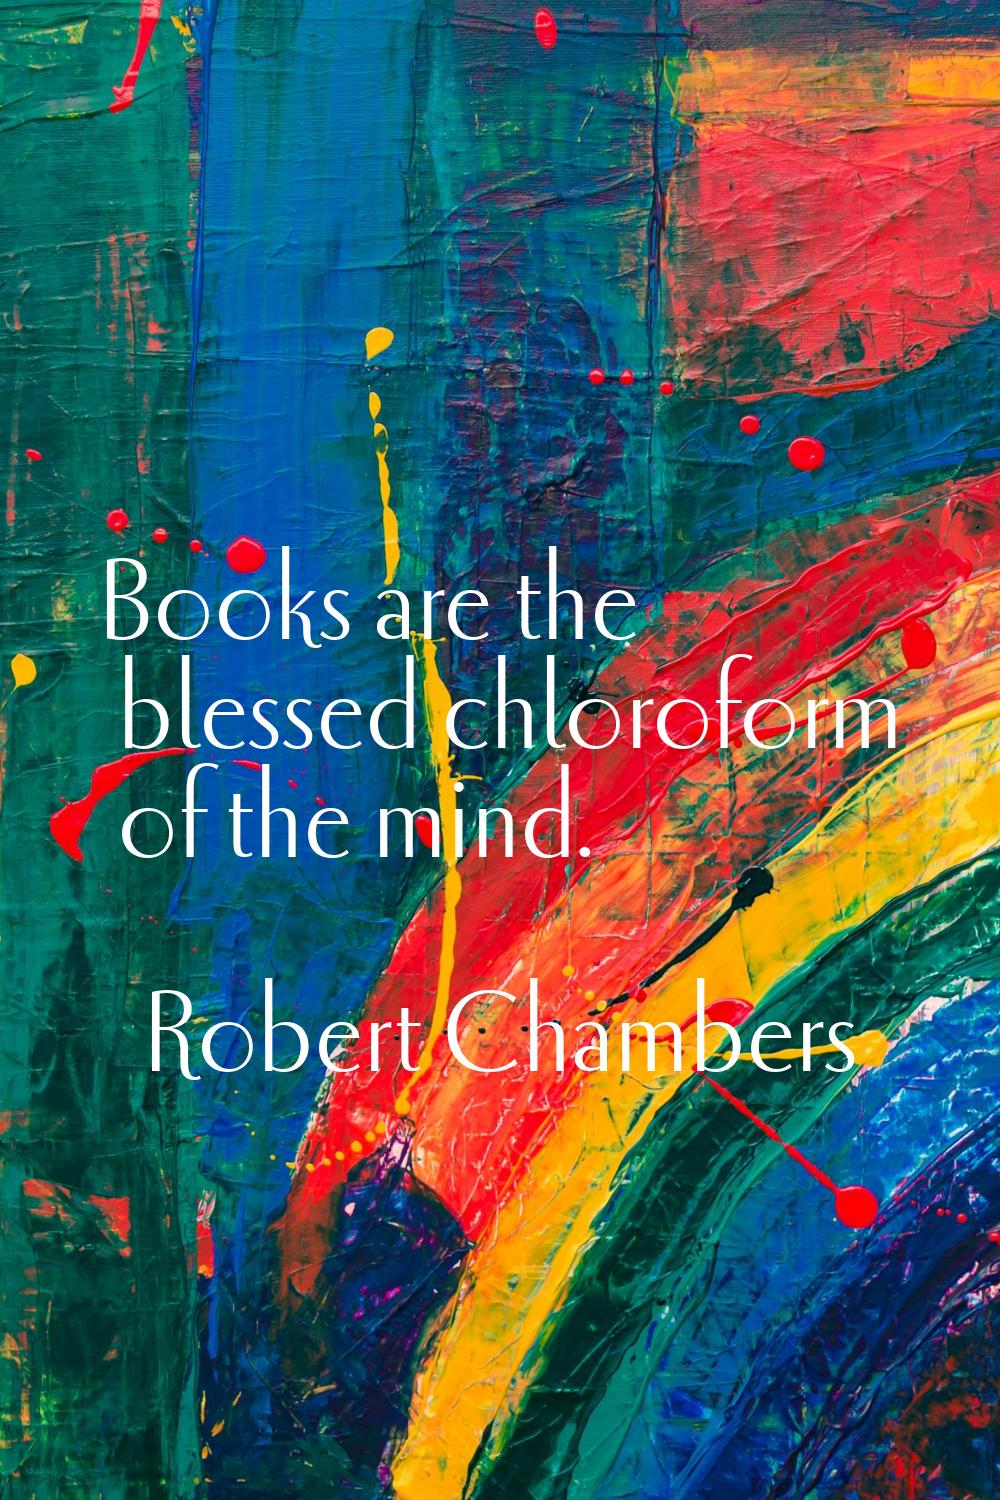 Books are the blessed chloroform of the mind.